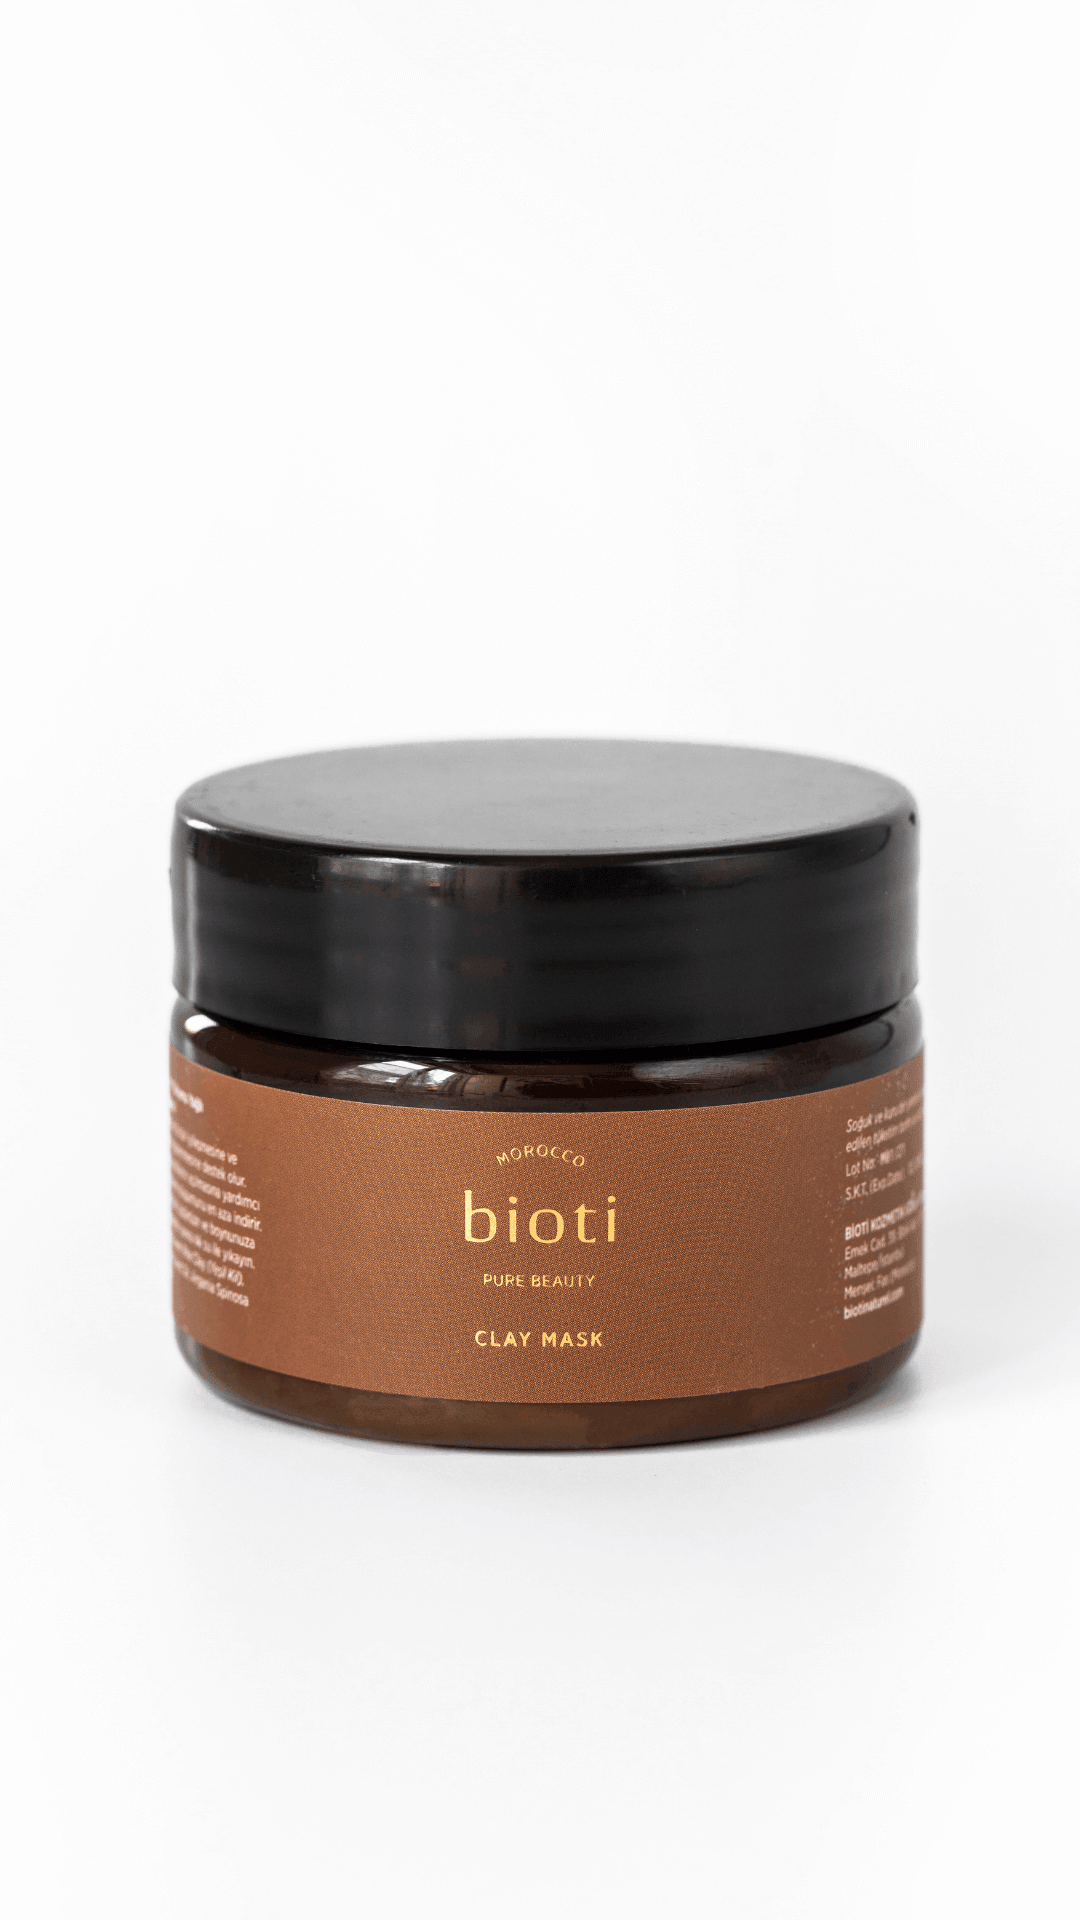 Bioti Face Clay Mask (with Argan and Prickly Pear Seed Oils)